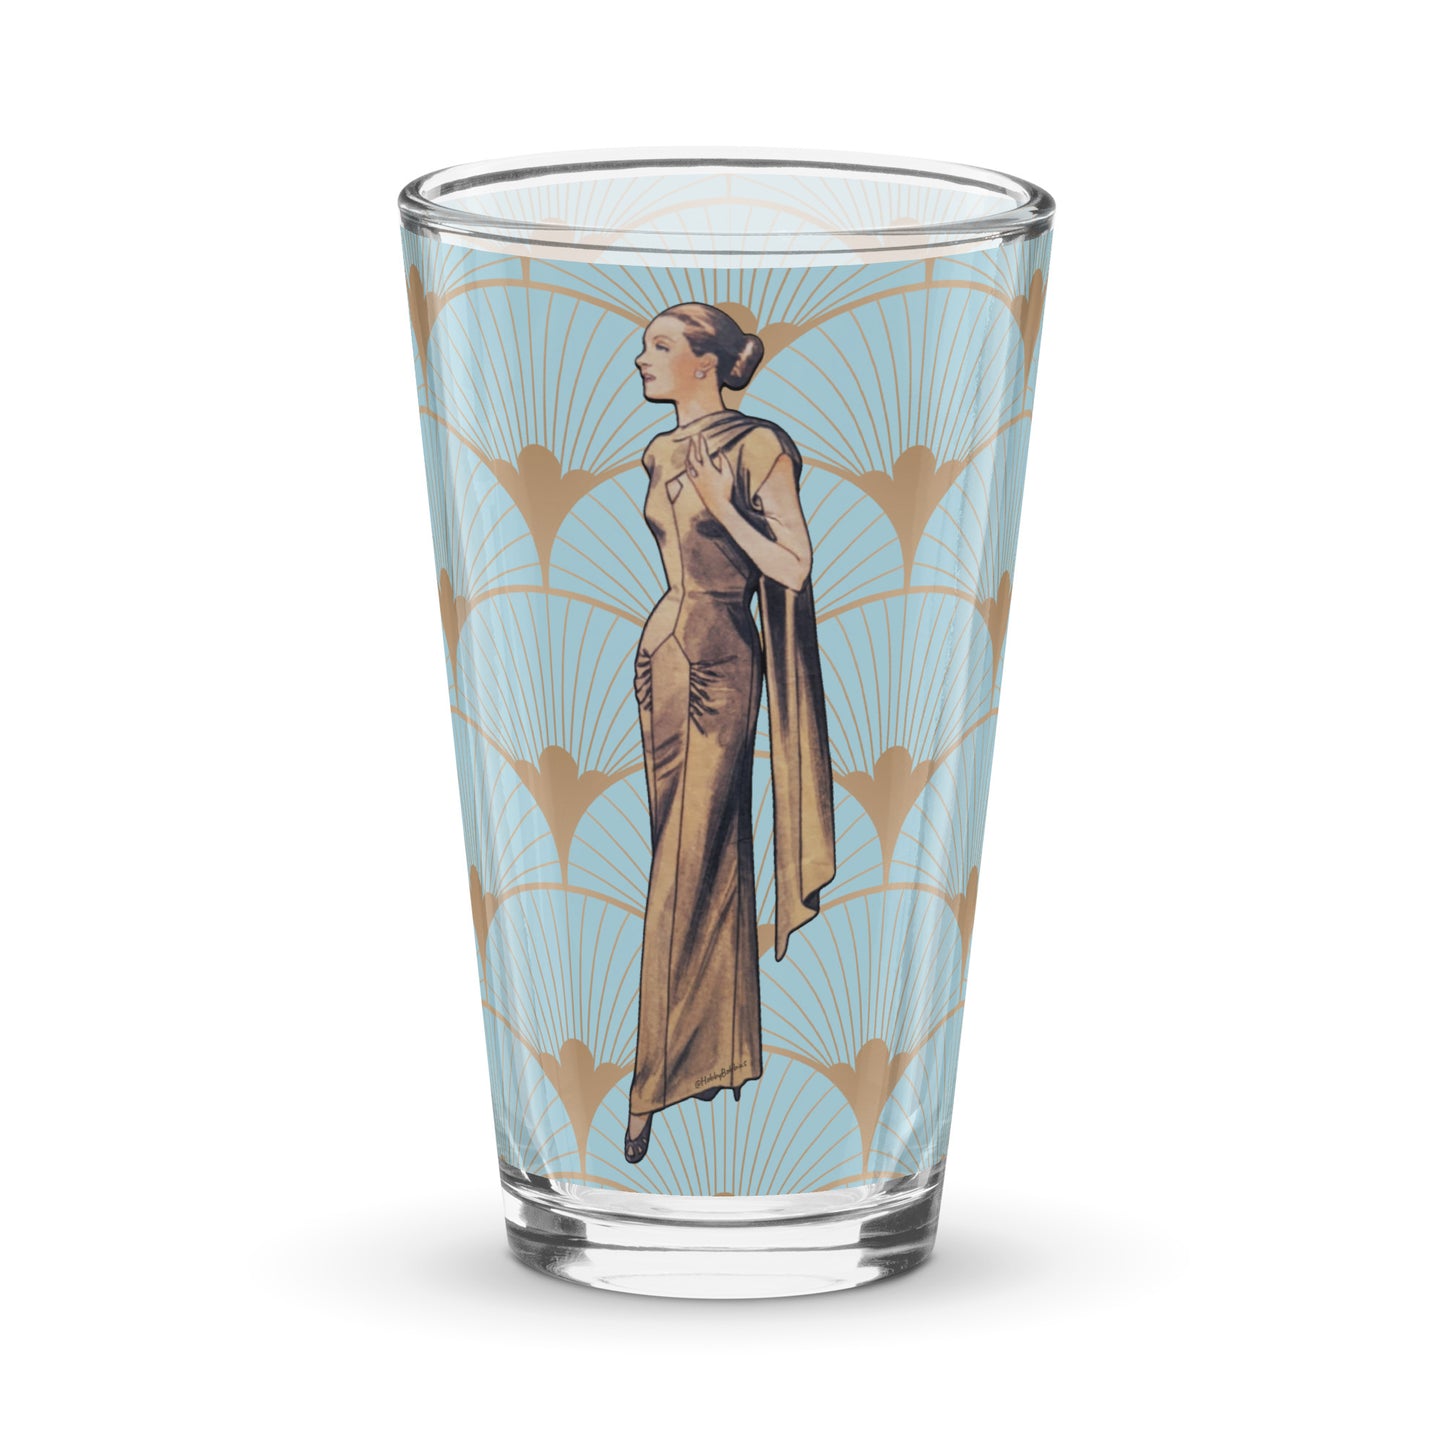 Vintage Art Collection Glasses - 1940s Glam Evening Gown